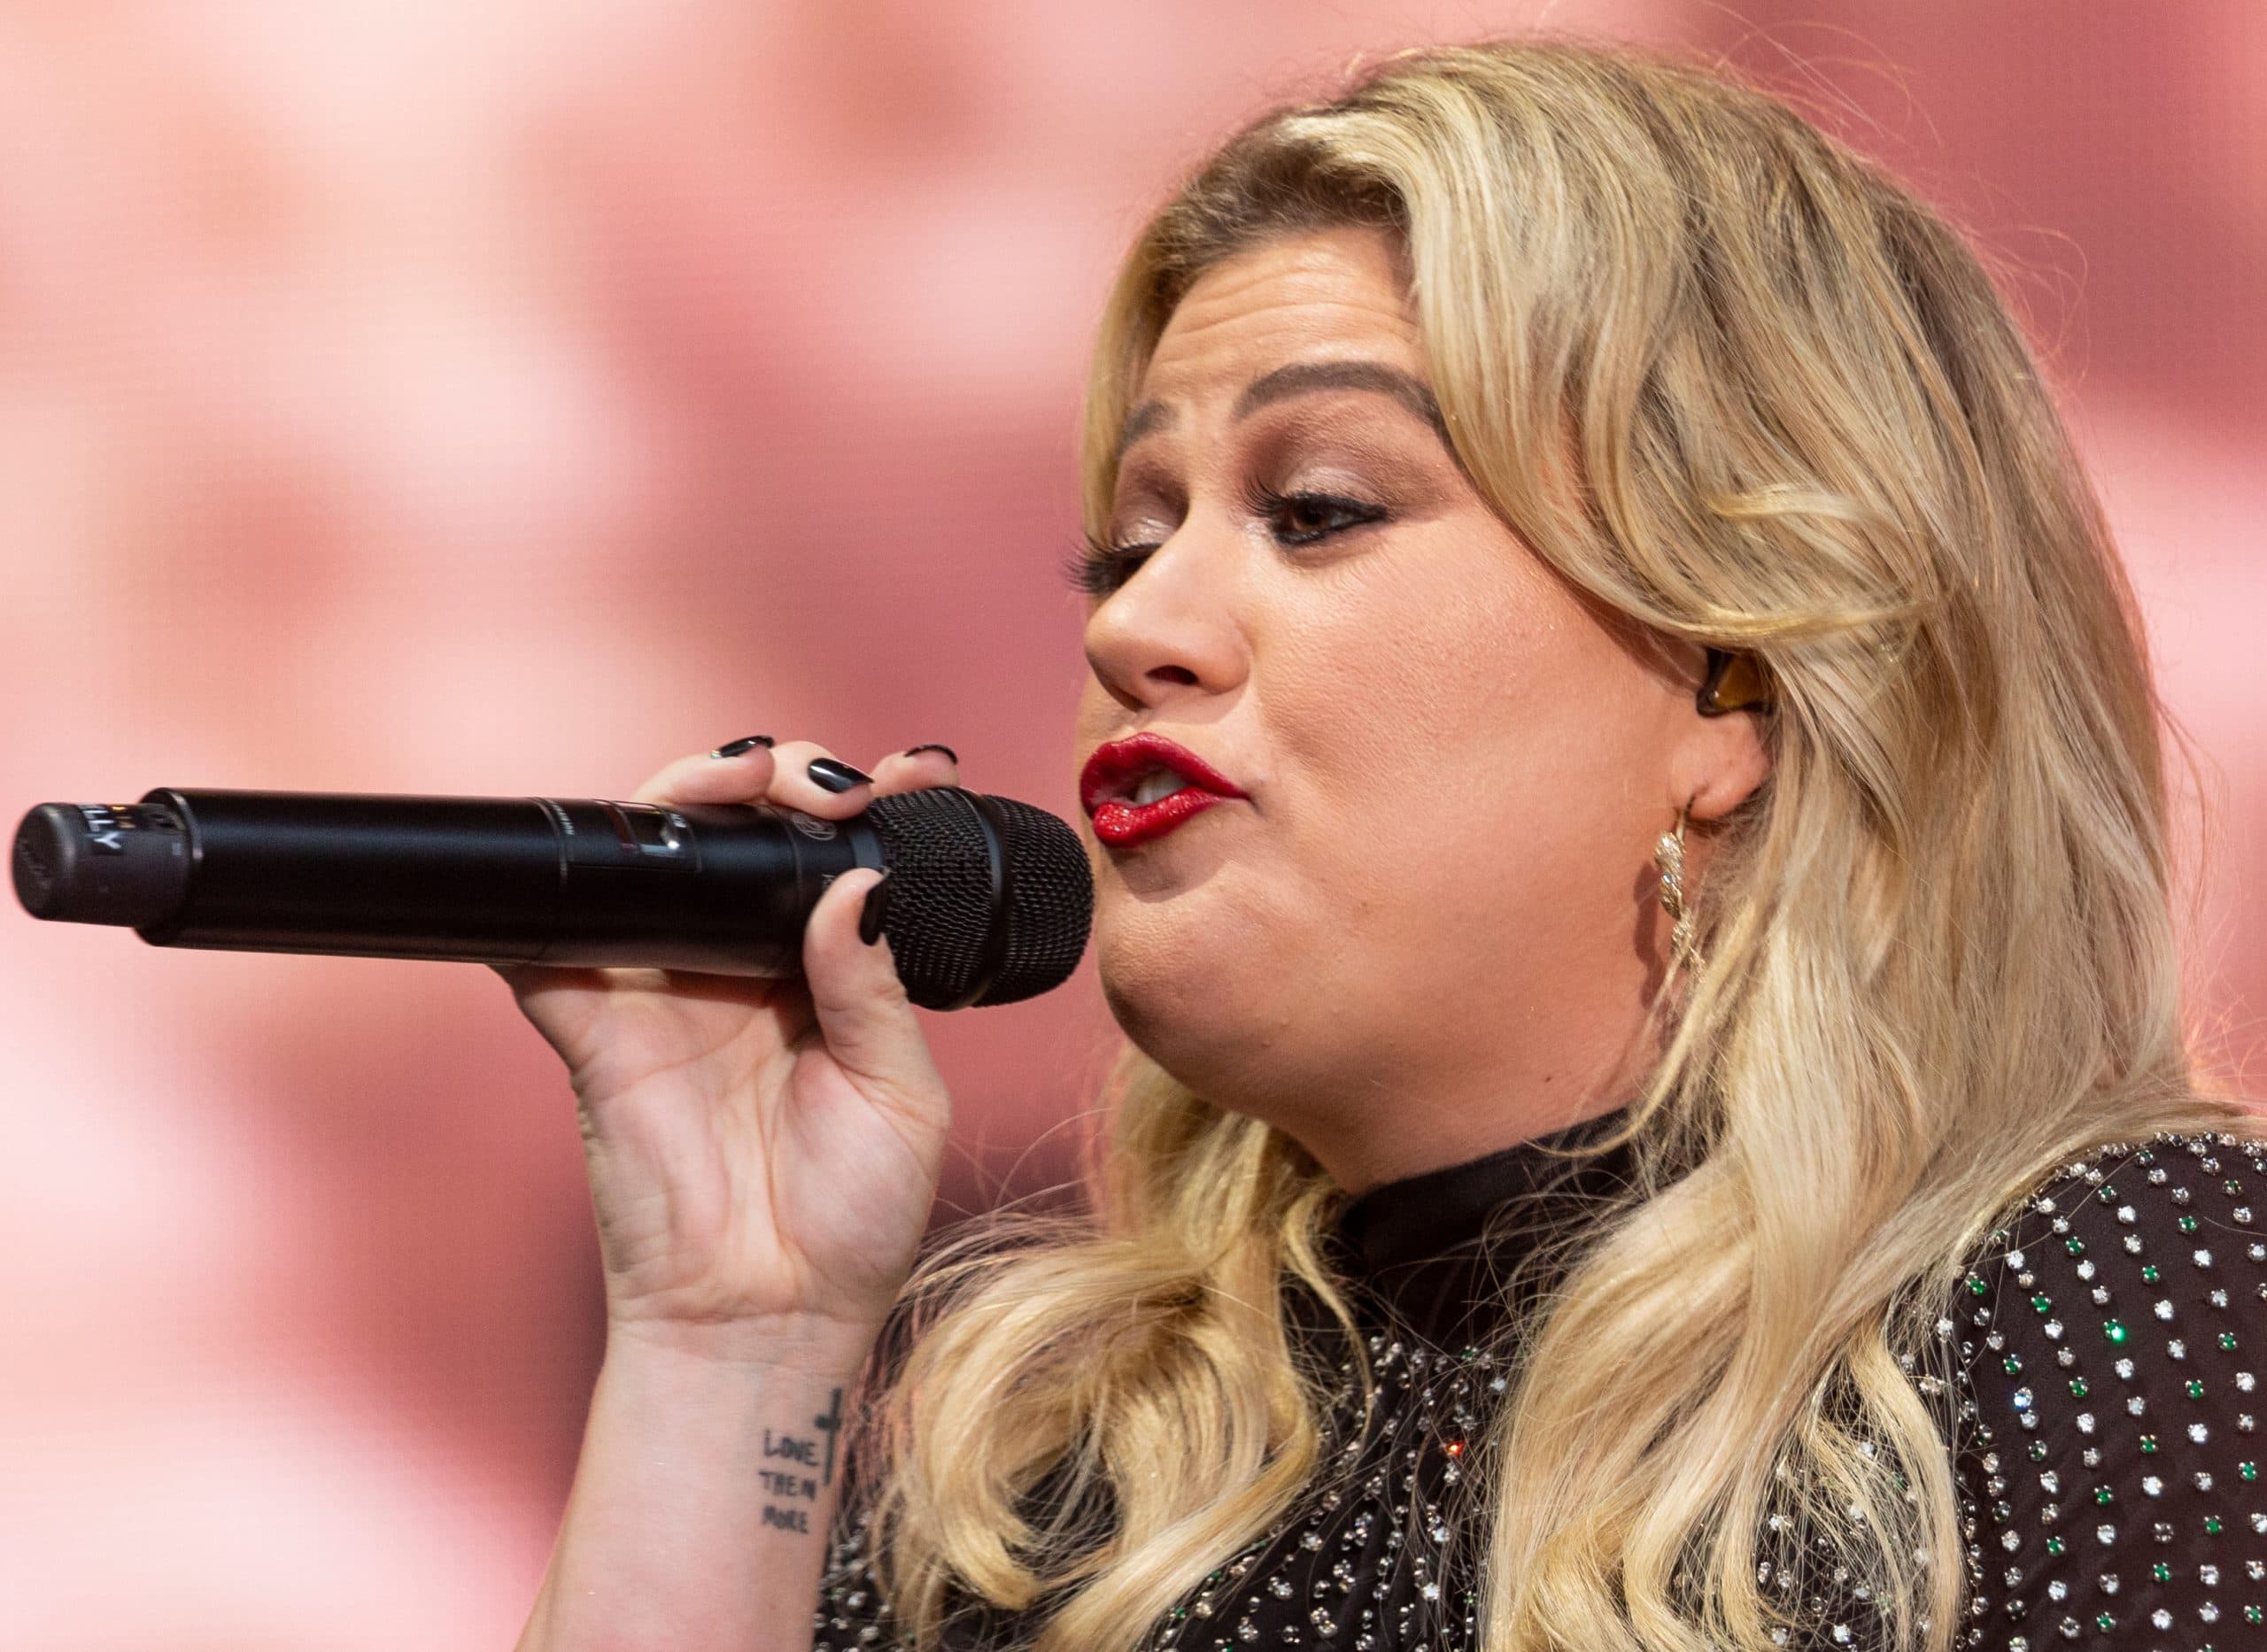 Kelly Clarkson has a cross tattoo with the words “Love Them More" inscribed on her right wrist